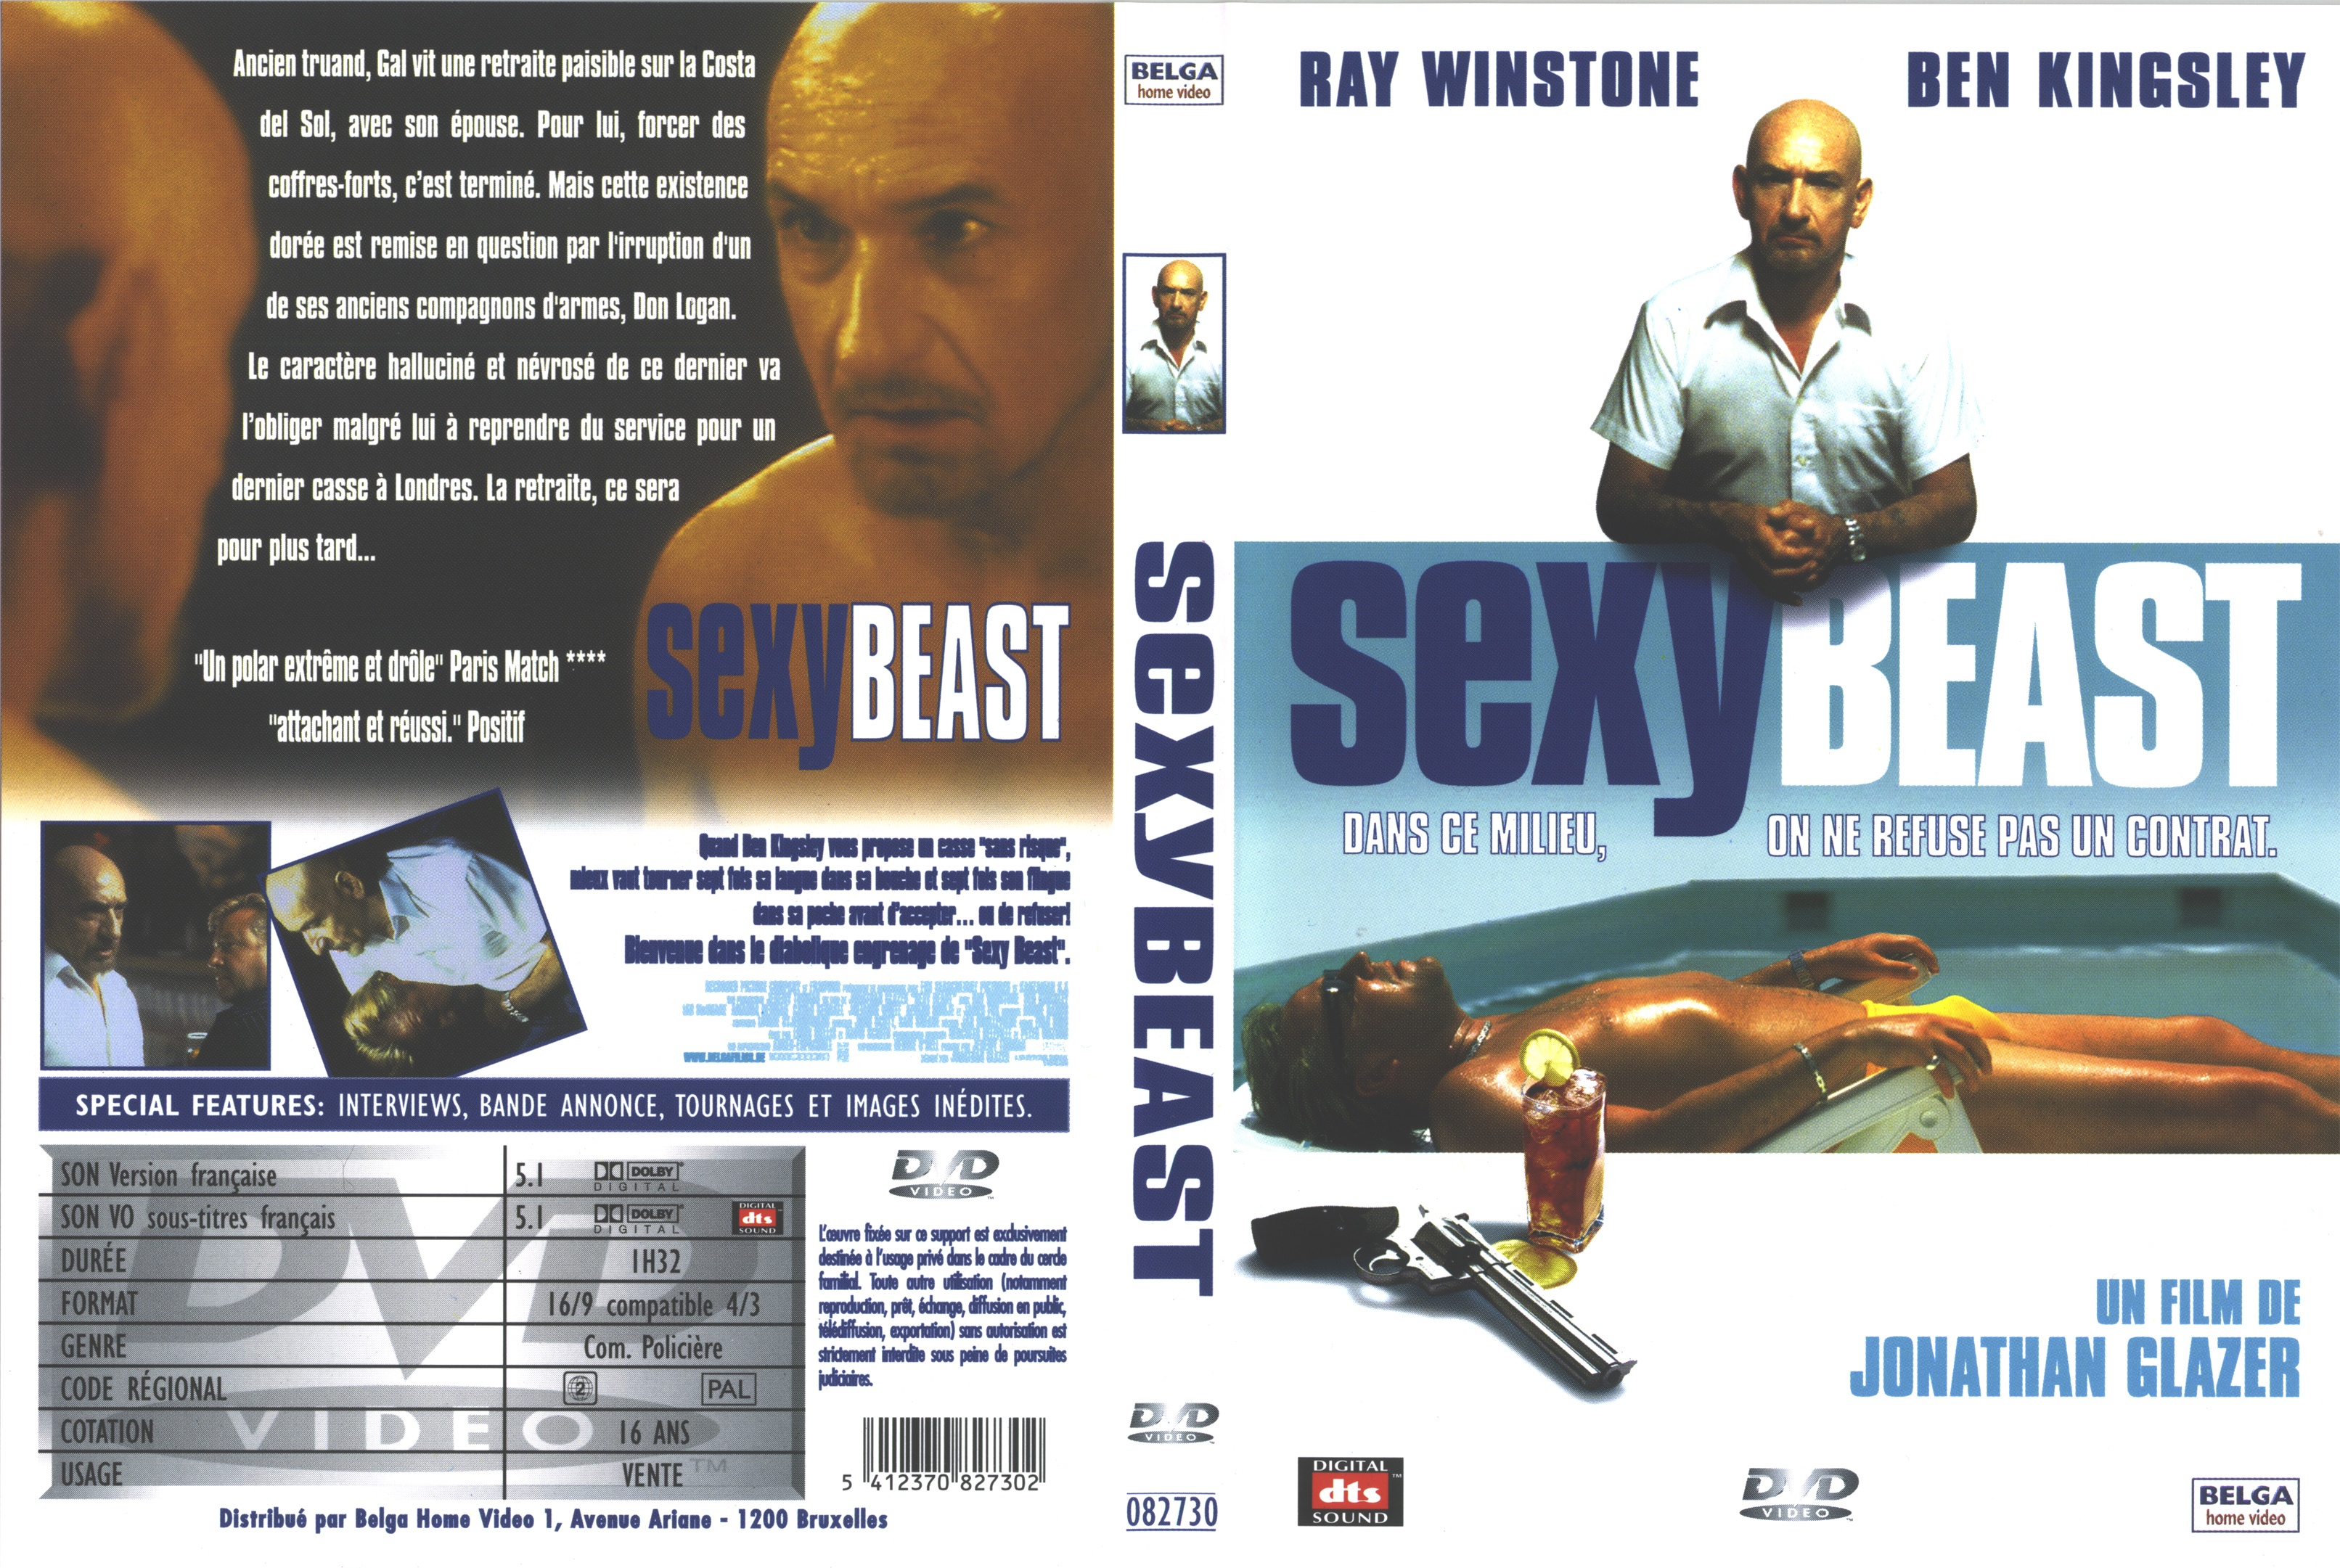 Jaquette DVD Sexy beast